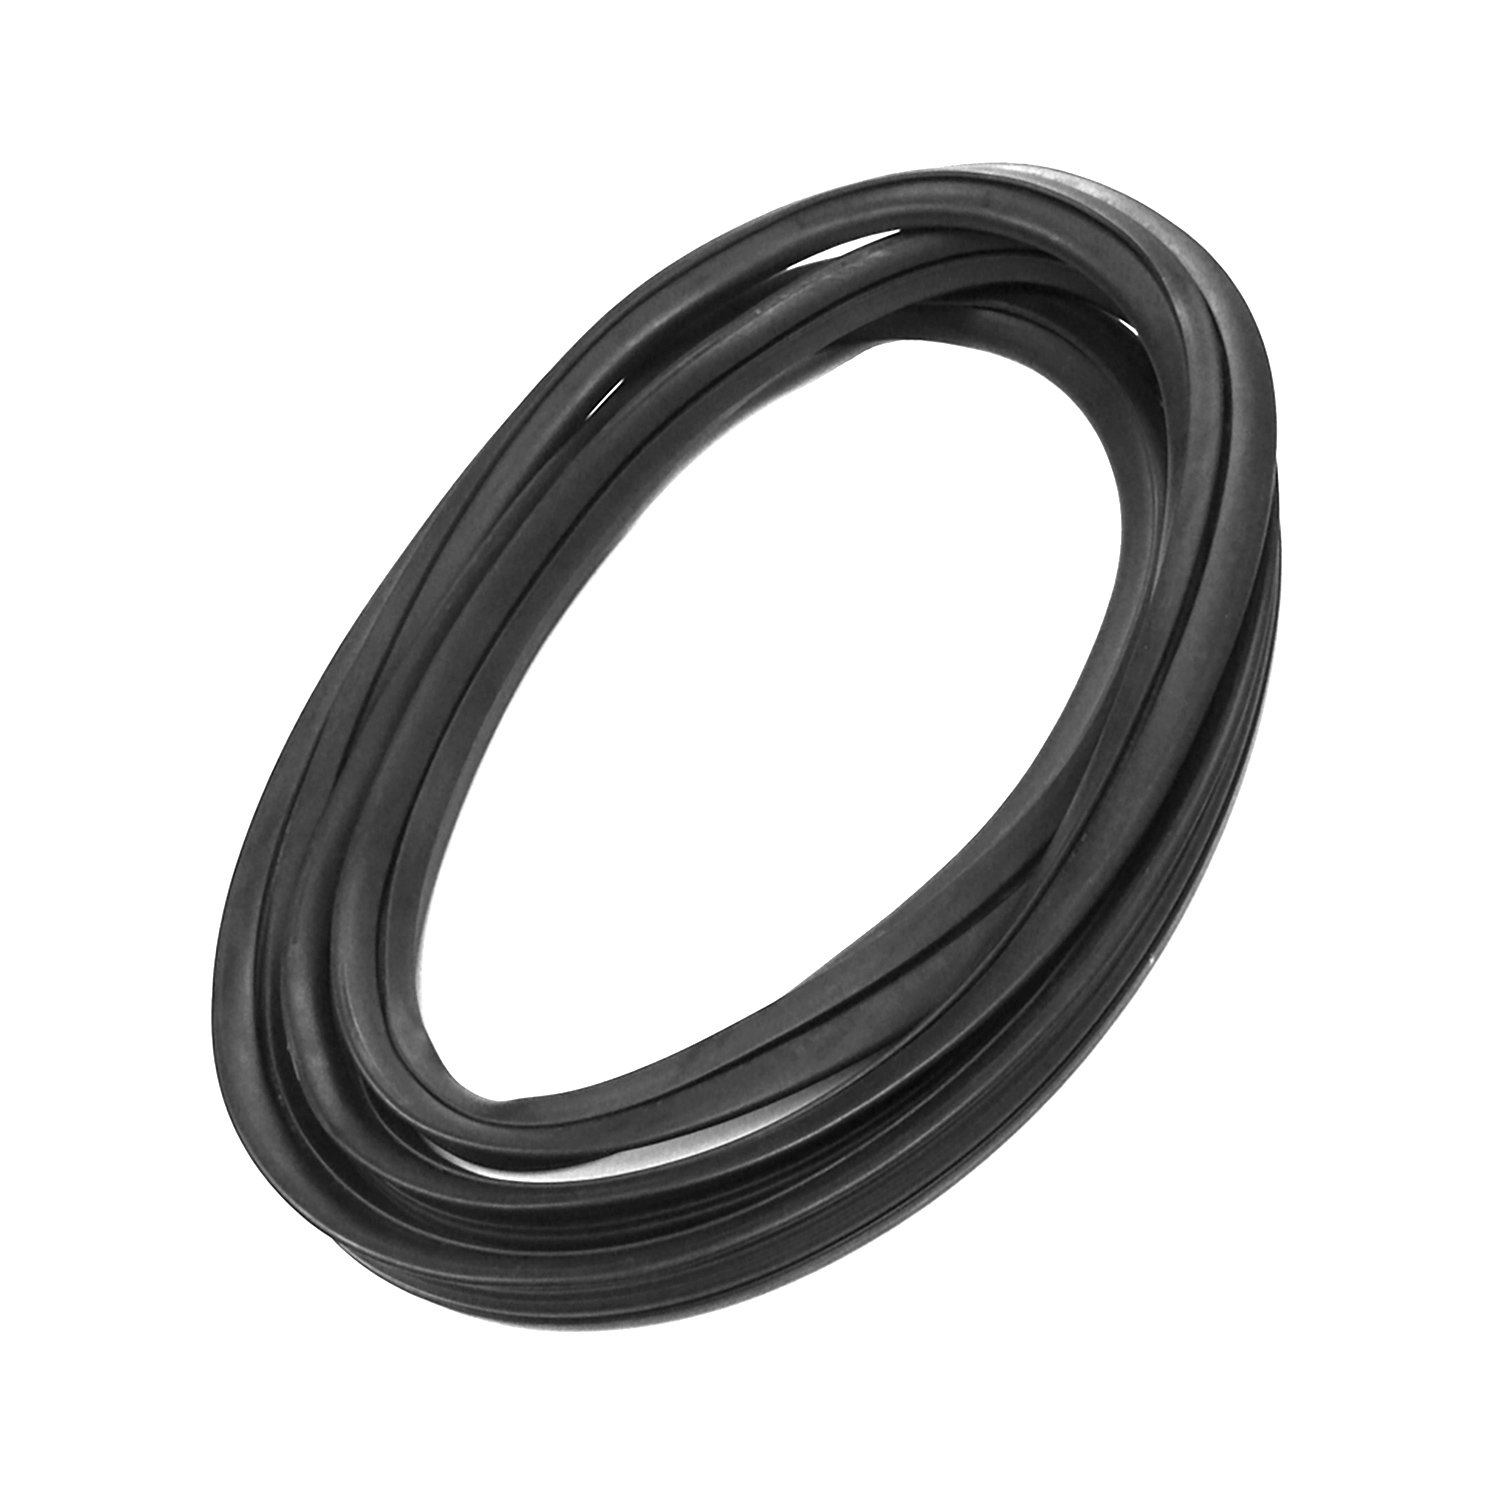 1976 GMC G15 Windshield Seal, 71-80 GM Full Size Van With Trim Groove, Each-VWS 7324-A